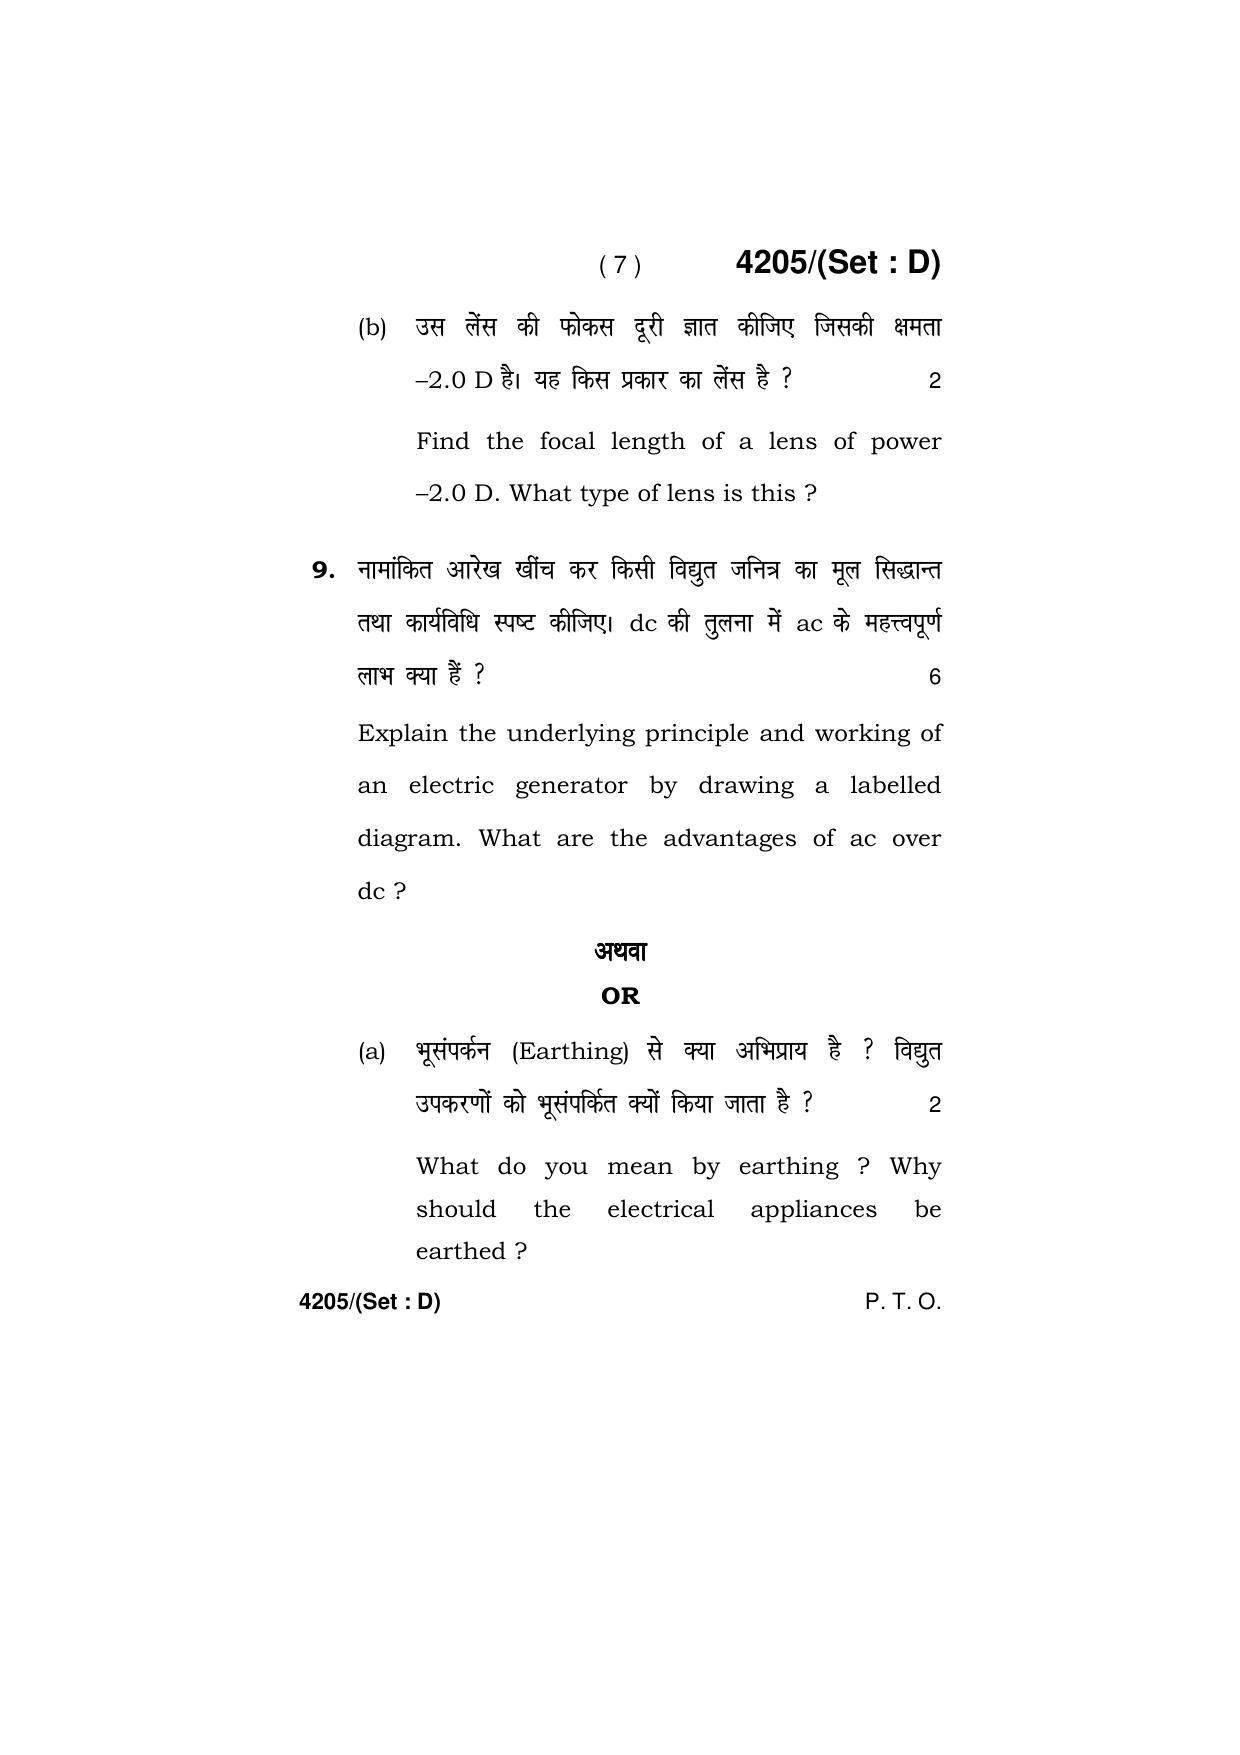 Haryana Board HBSE Class 10 Science (All Set) 2019 Question Paper - Page 55